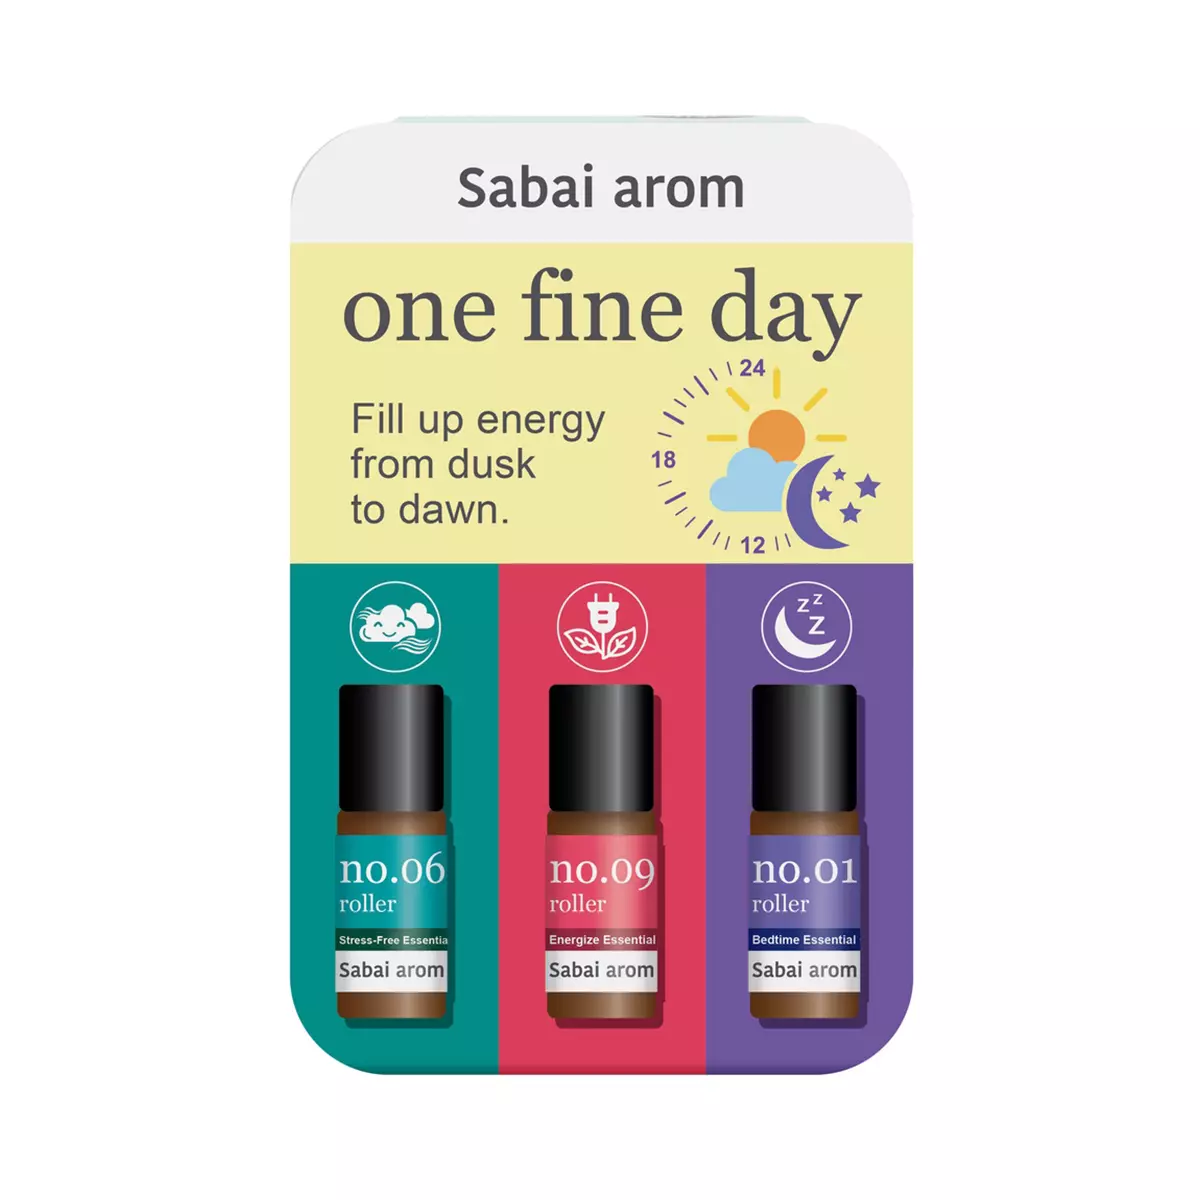 One Fine Day Essential Oils Spot Roller Trio 3 ml. x 3 The power of essential oils in mini sizing with 3 different blends <strong>No.06</strong> With the soul essences of plants distilled from Lemongrass, Lavender, Spearmint, Bergamot, Eucalyptus and Cornmint, to release intense mind that’s stuck in the middle of depression. <strong>No.09</strong> With the soul essences of plants distilled from Cornmint, Lemon, Rosemary, Star Anise, Eucalyptus and Sweet Orange, to restore positive energy to your steps. <strong>No.01</strong> With the soul essences of plant distilled from Lavender, Ylang, Ylang, Chamomile, Eucalyptus, Bergamot and Orange, to calm minds that struggle to find their break at bedtime.